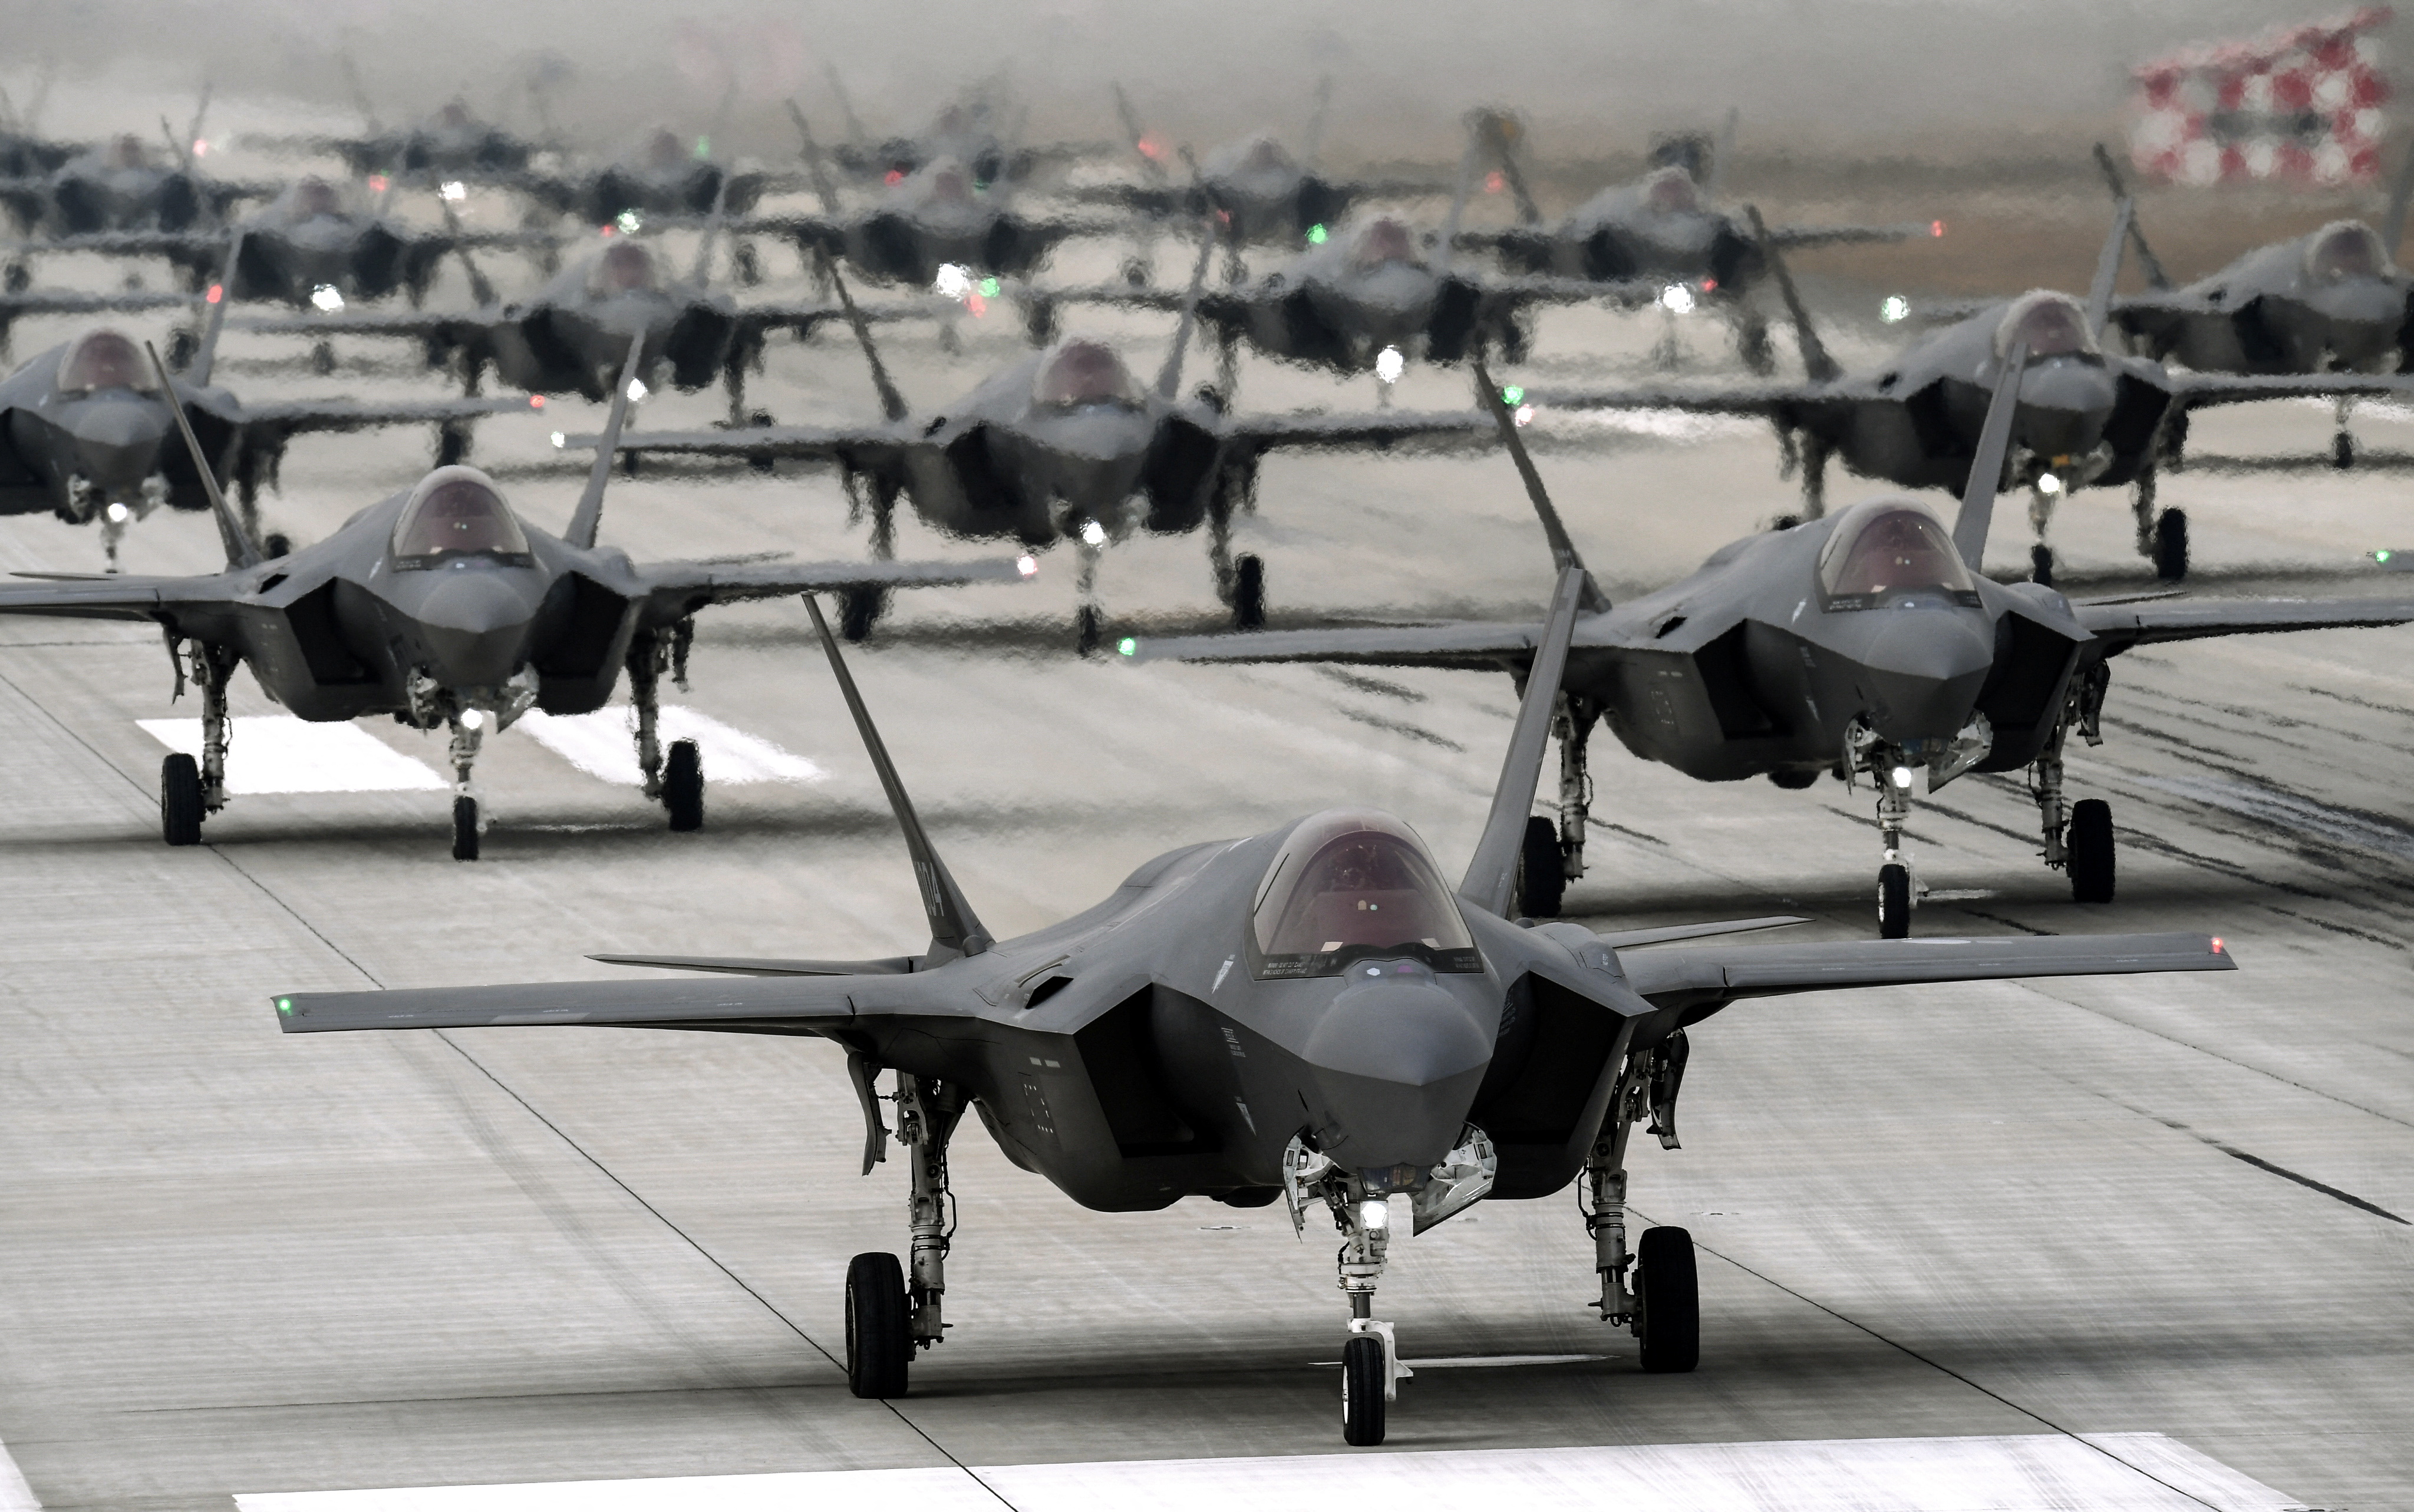 F-35A fighter jets at a military exercise 'Elephant Walk'